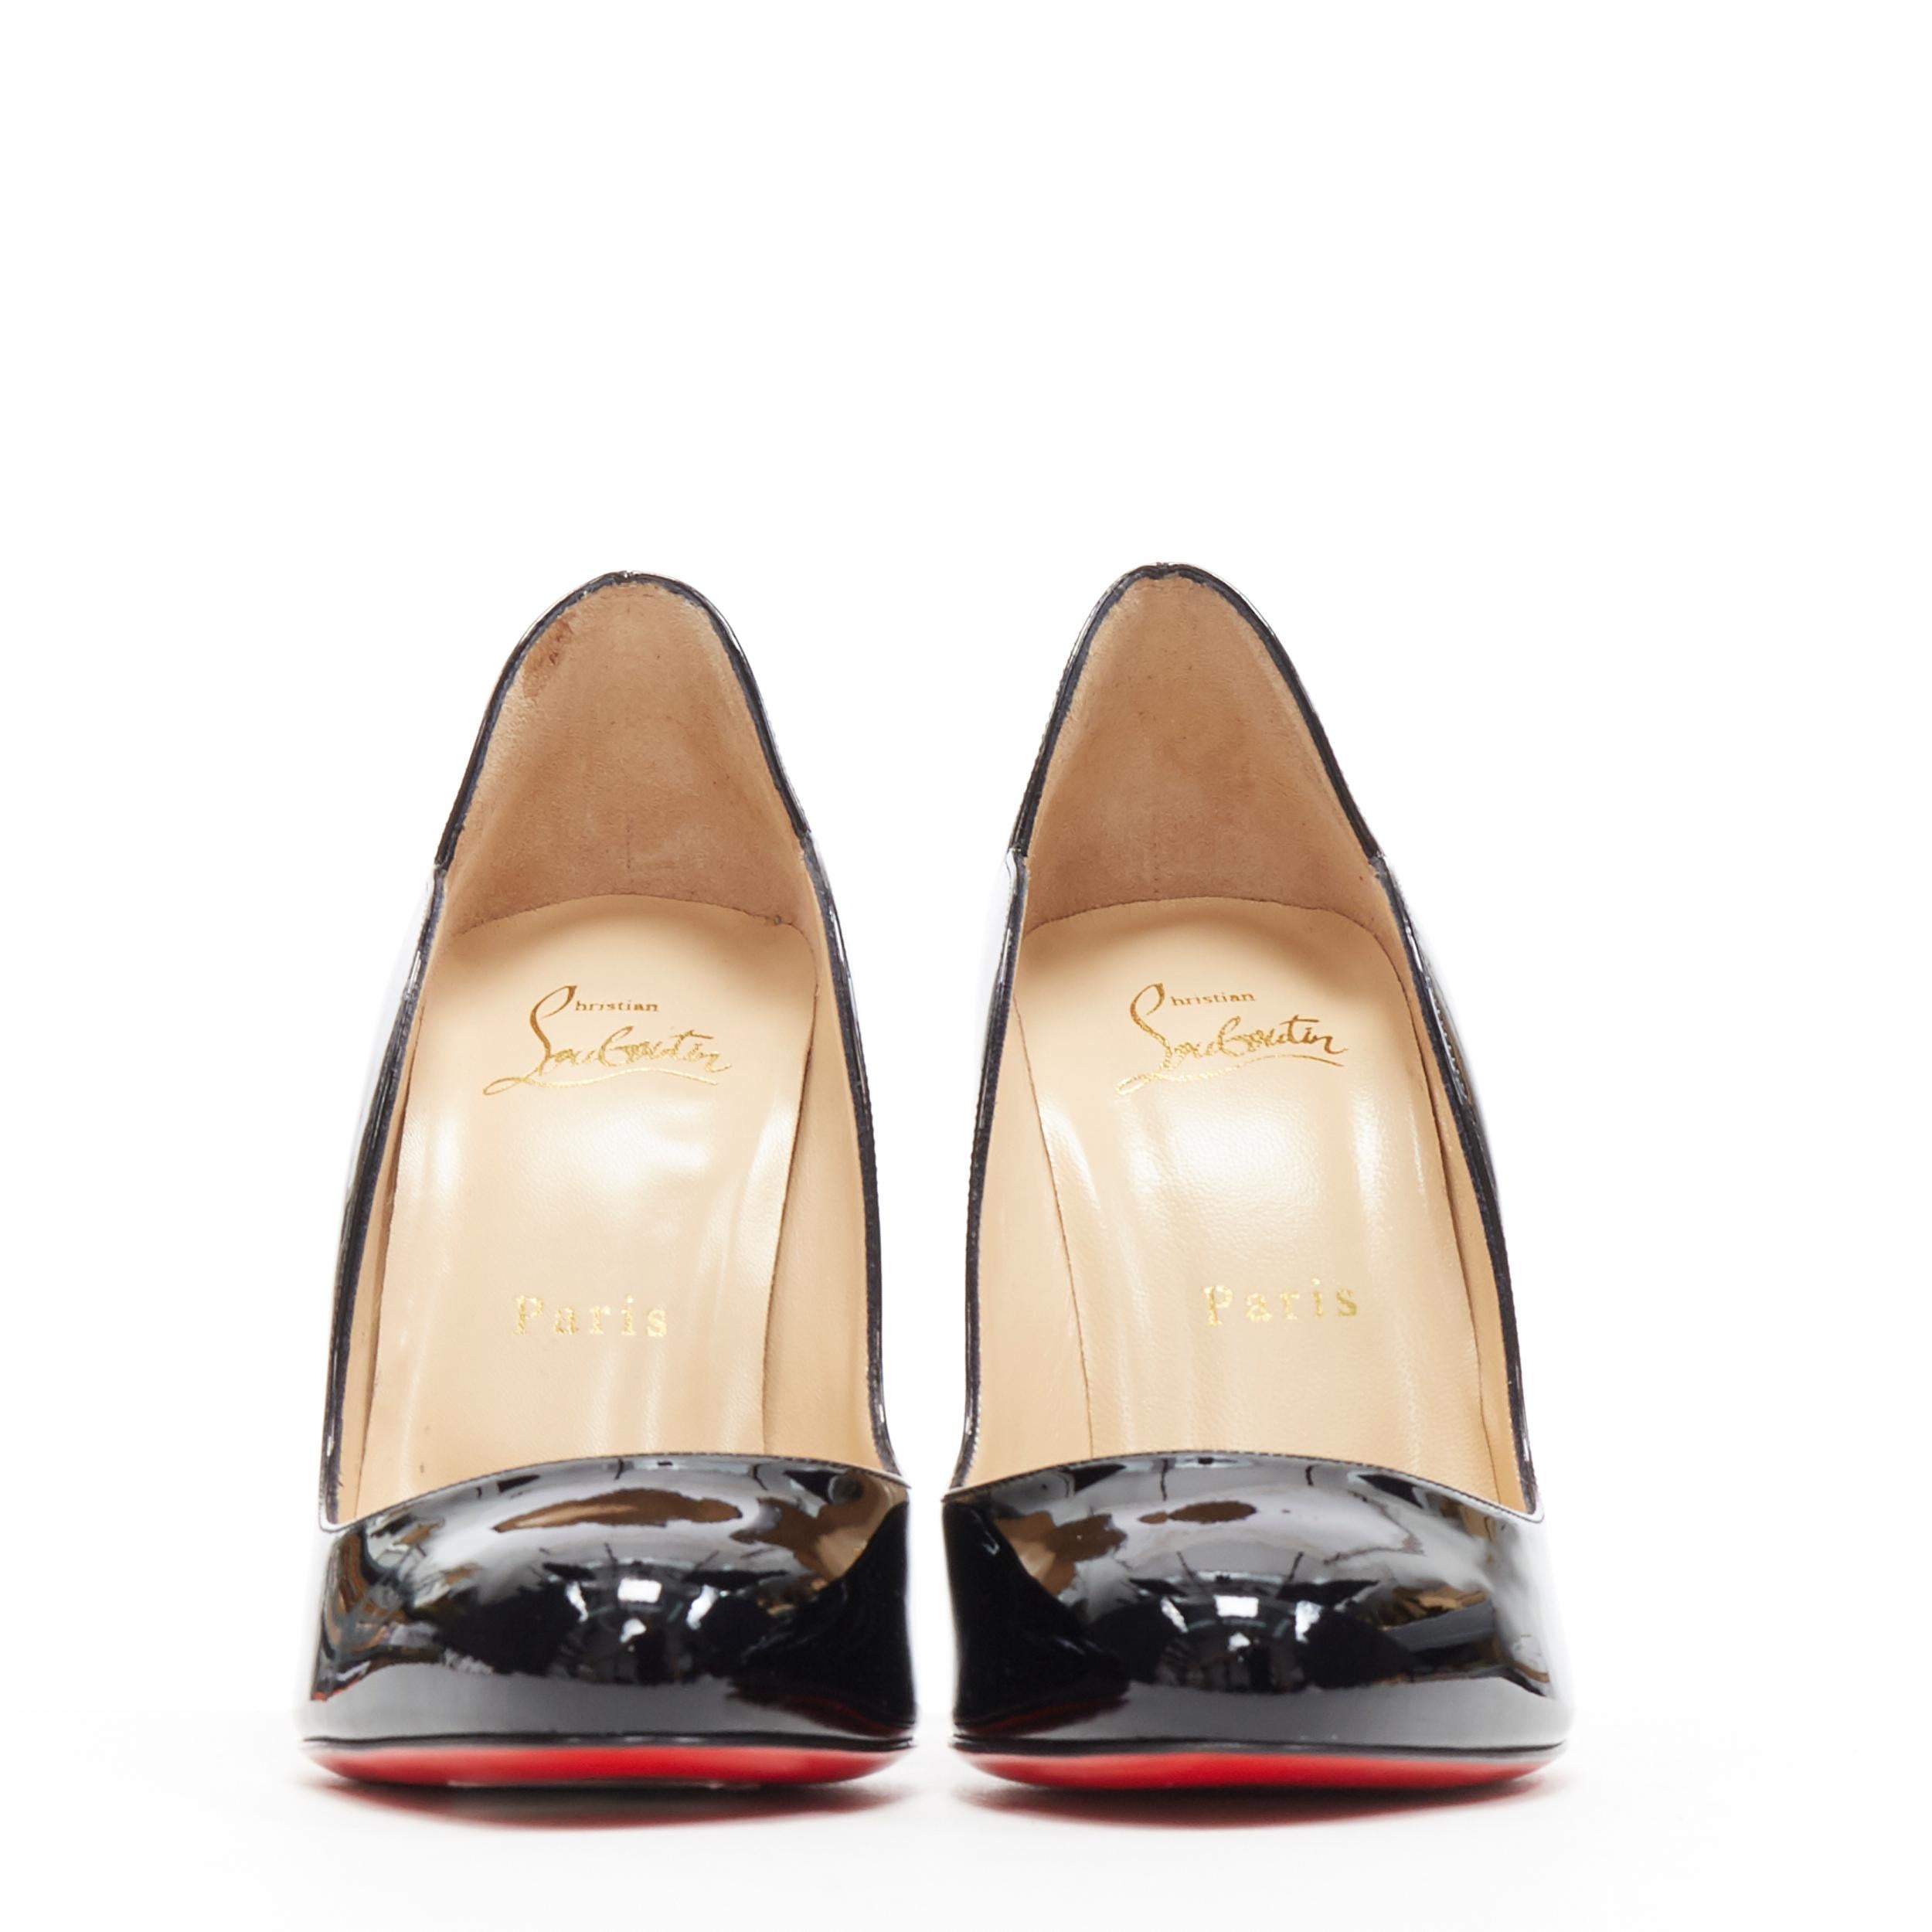 new CHRISTIAN LOUBOUTIN Wawy Dolly 100 black patent squiggly heel pump ...